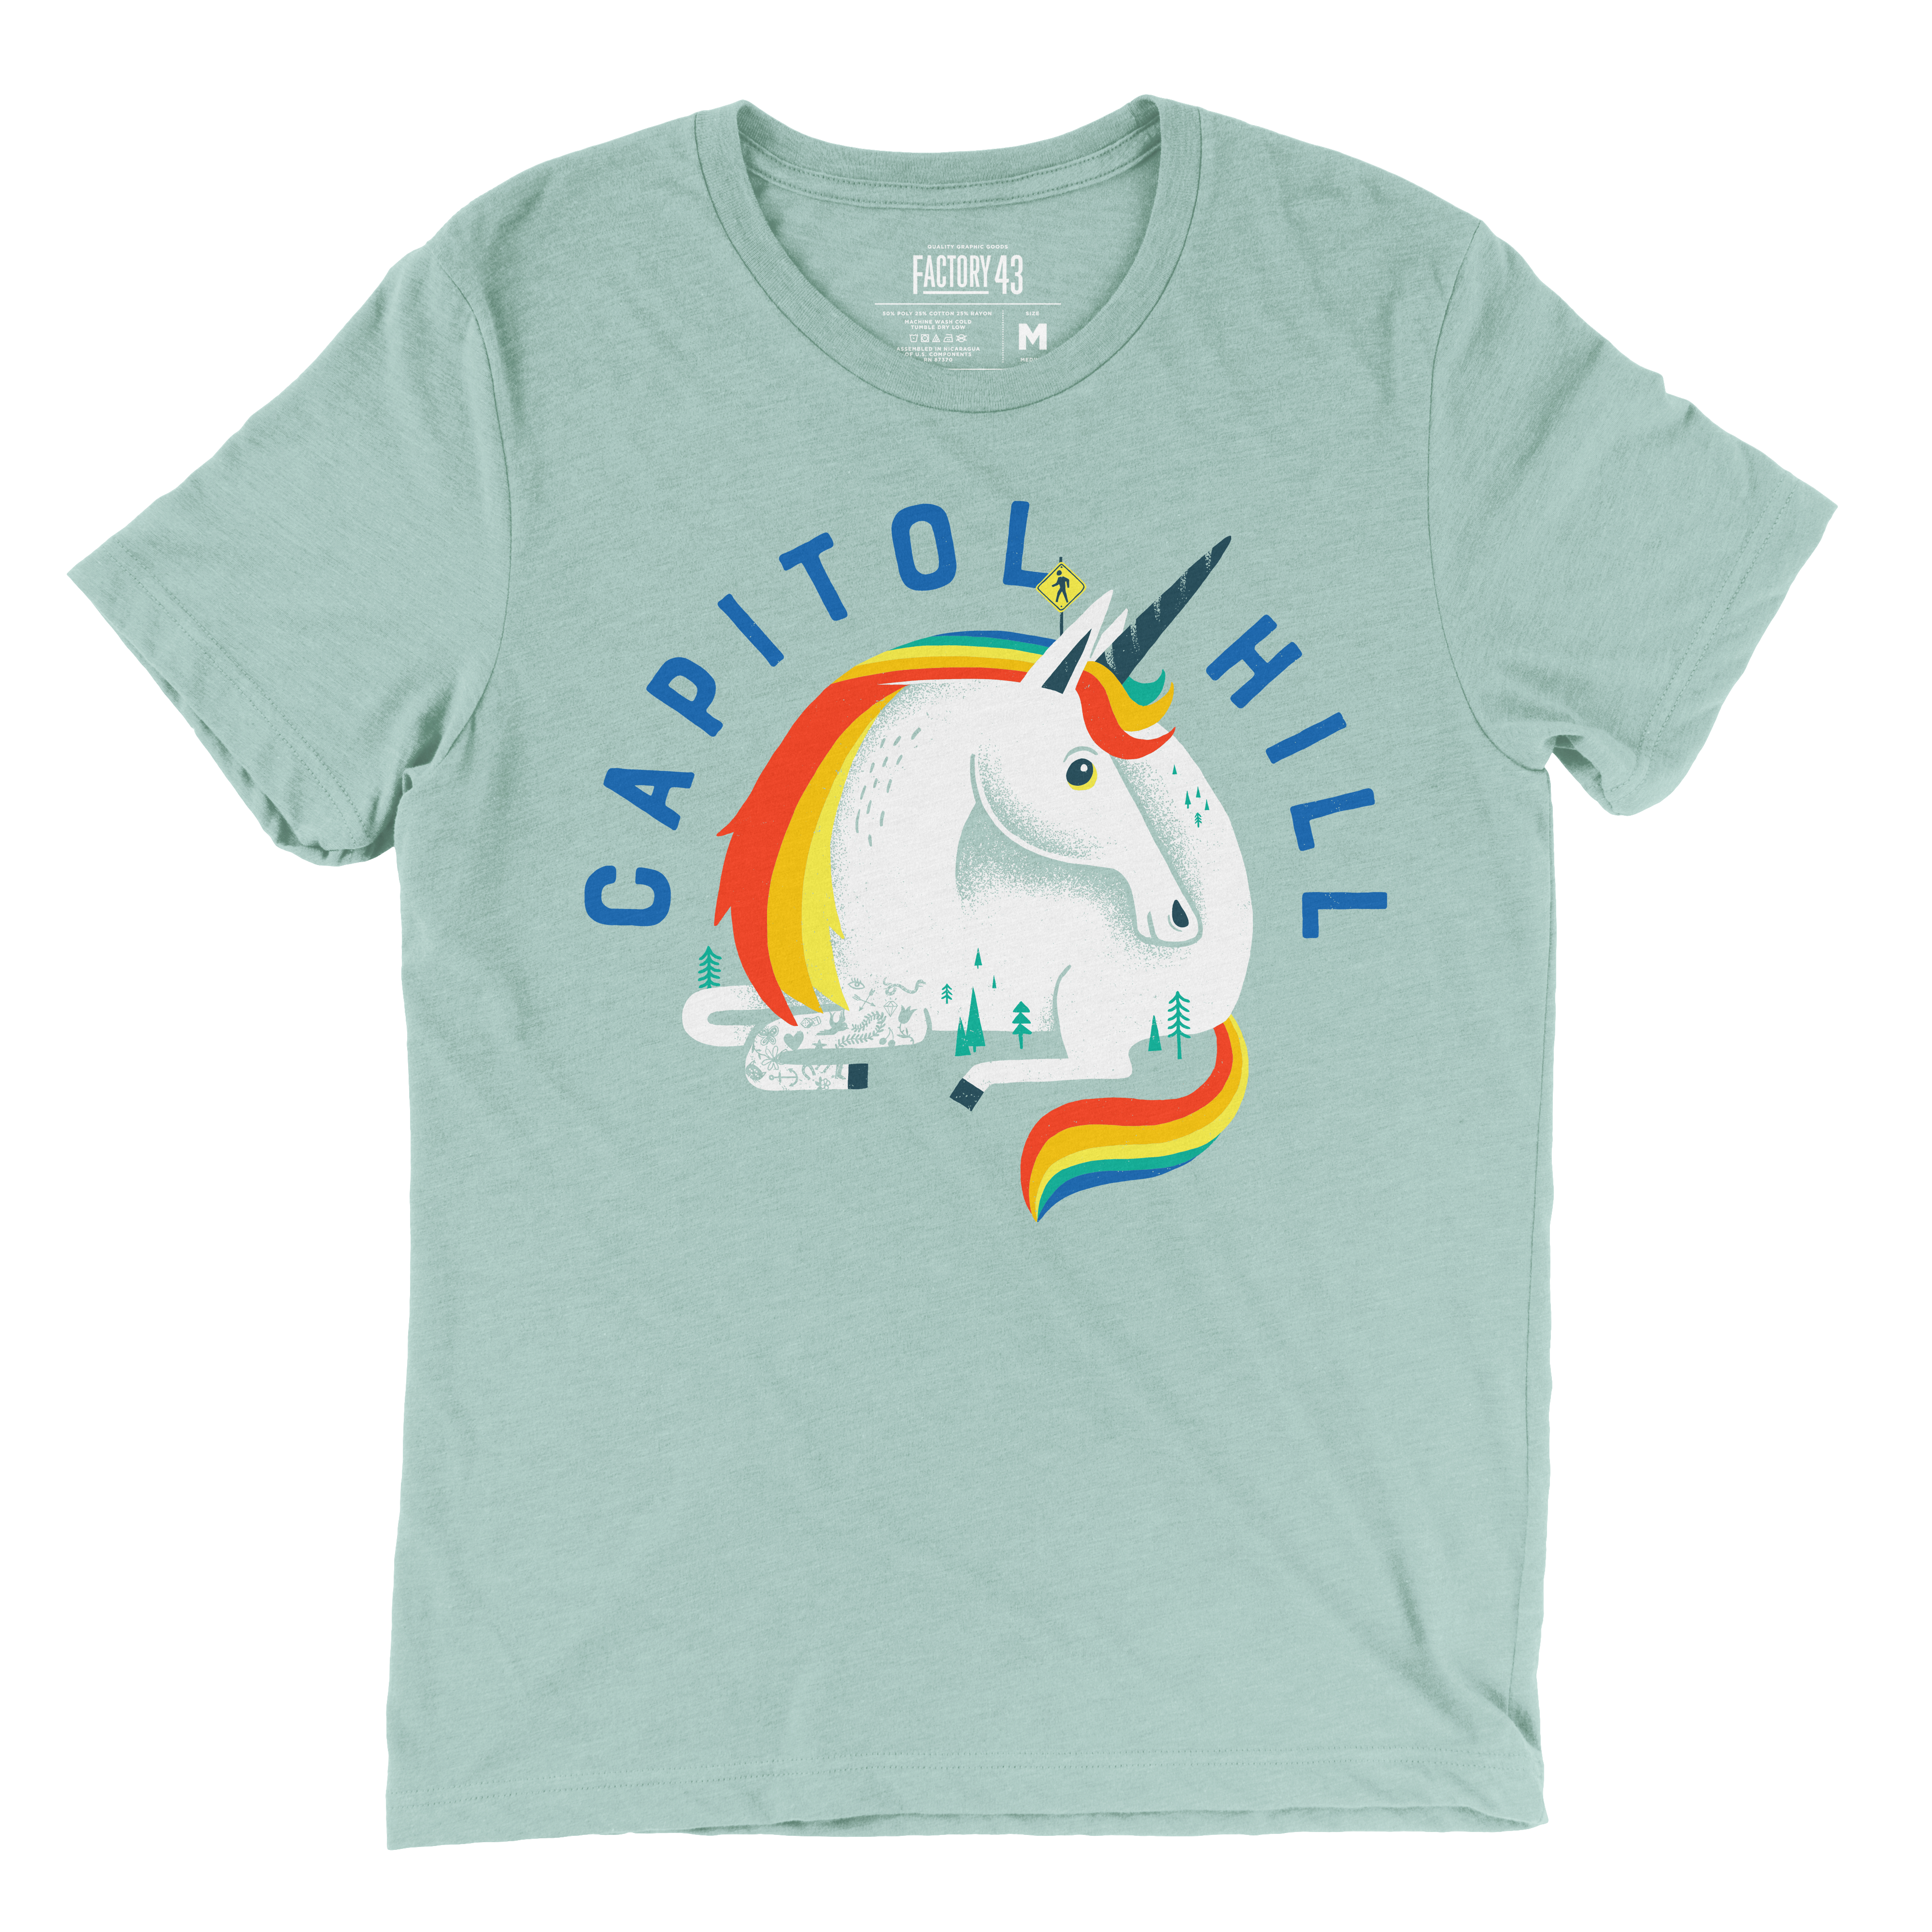 Capitol Hill tee